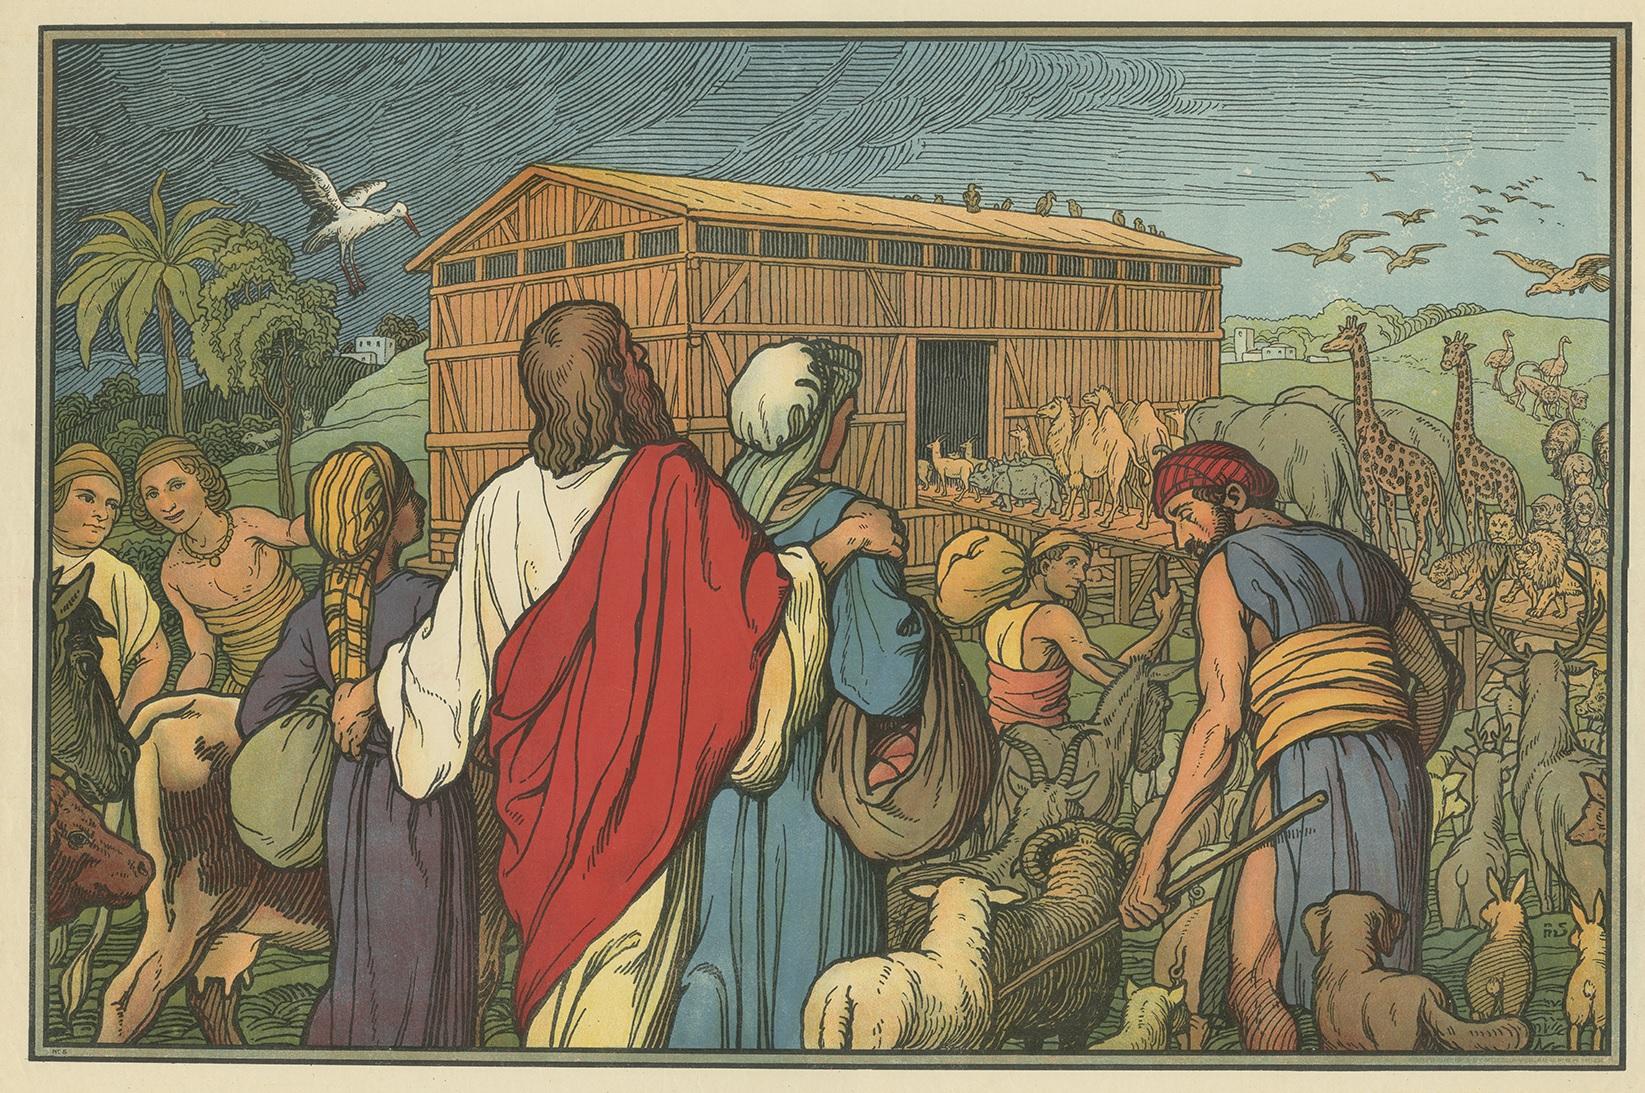 Large antique print of Noah's Ark. Published by Mosella-Verlag, 1913. This print originates from a series titled 'Kathol. Schulbibelwerk von Dr. Ecker'.